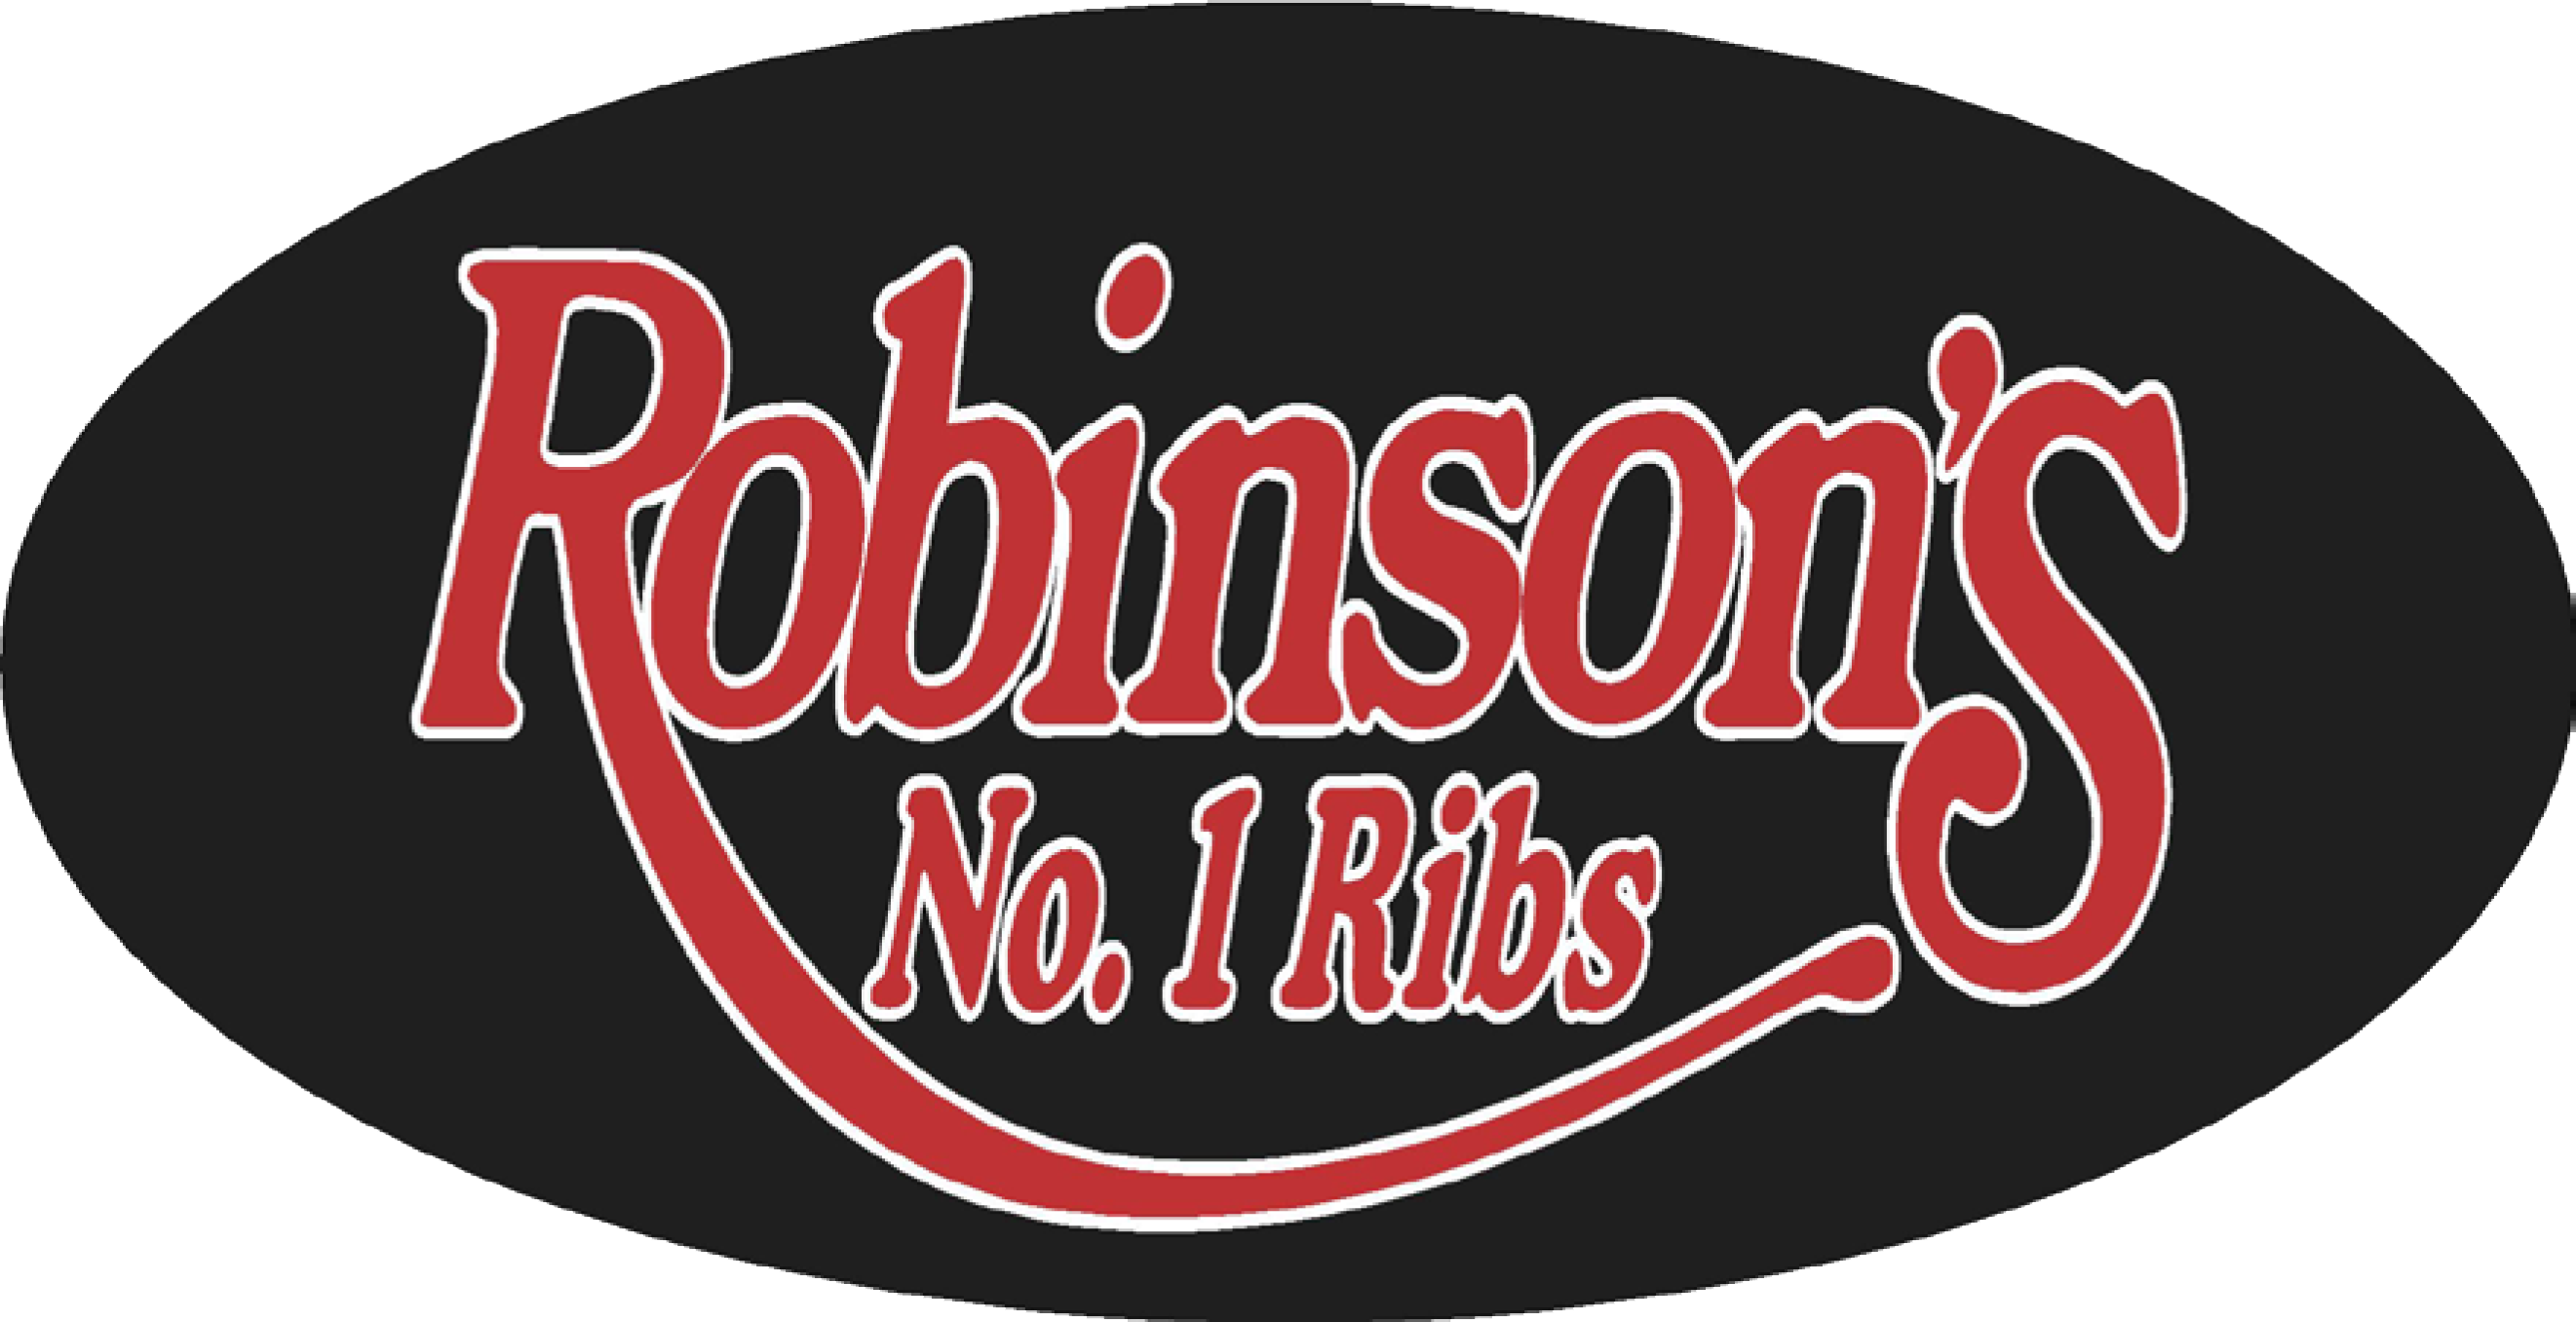 Robinsons's No. 1 Ribs logo that links to the restaurant's website